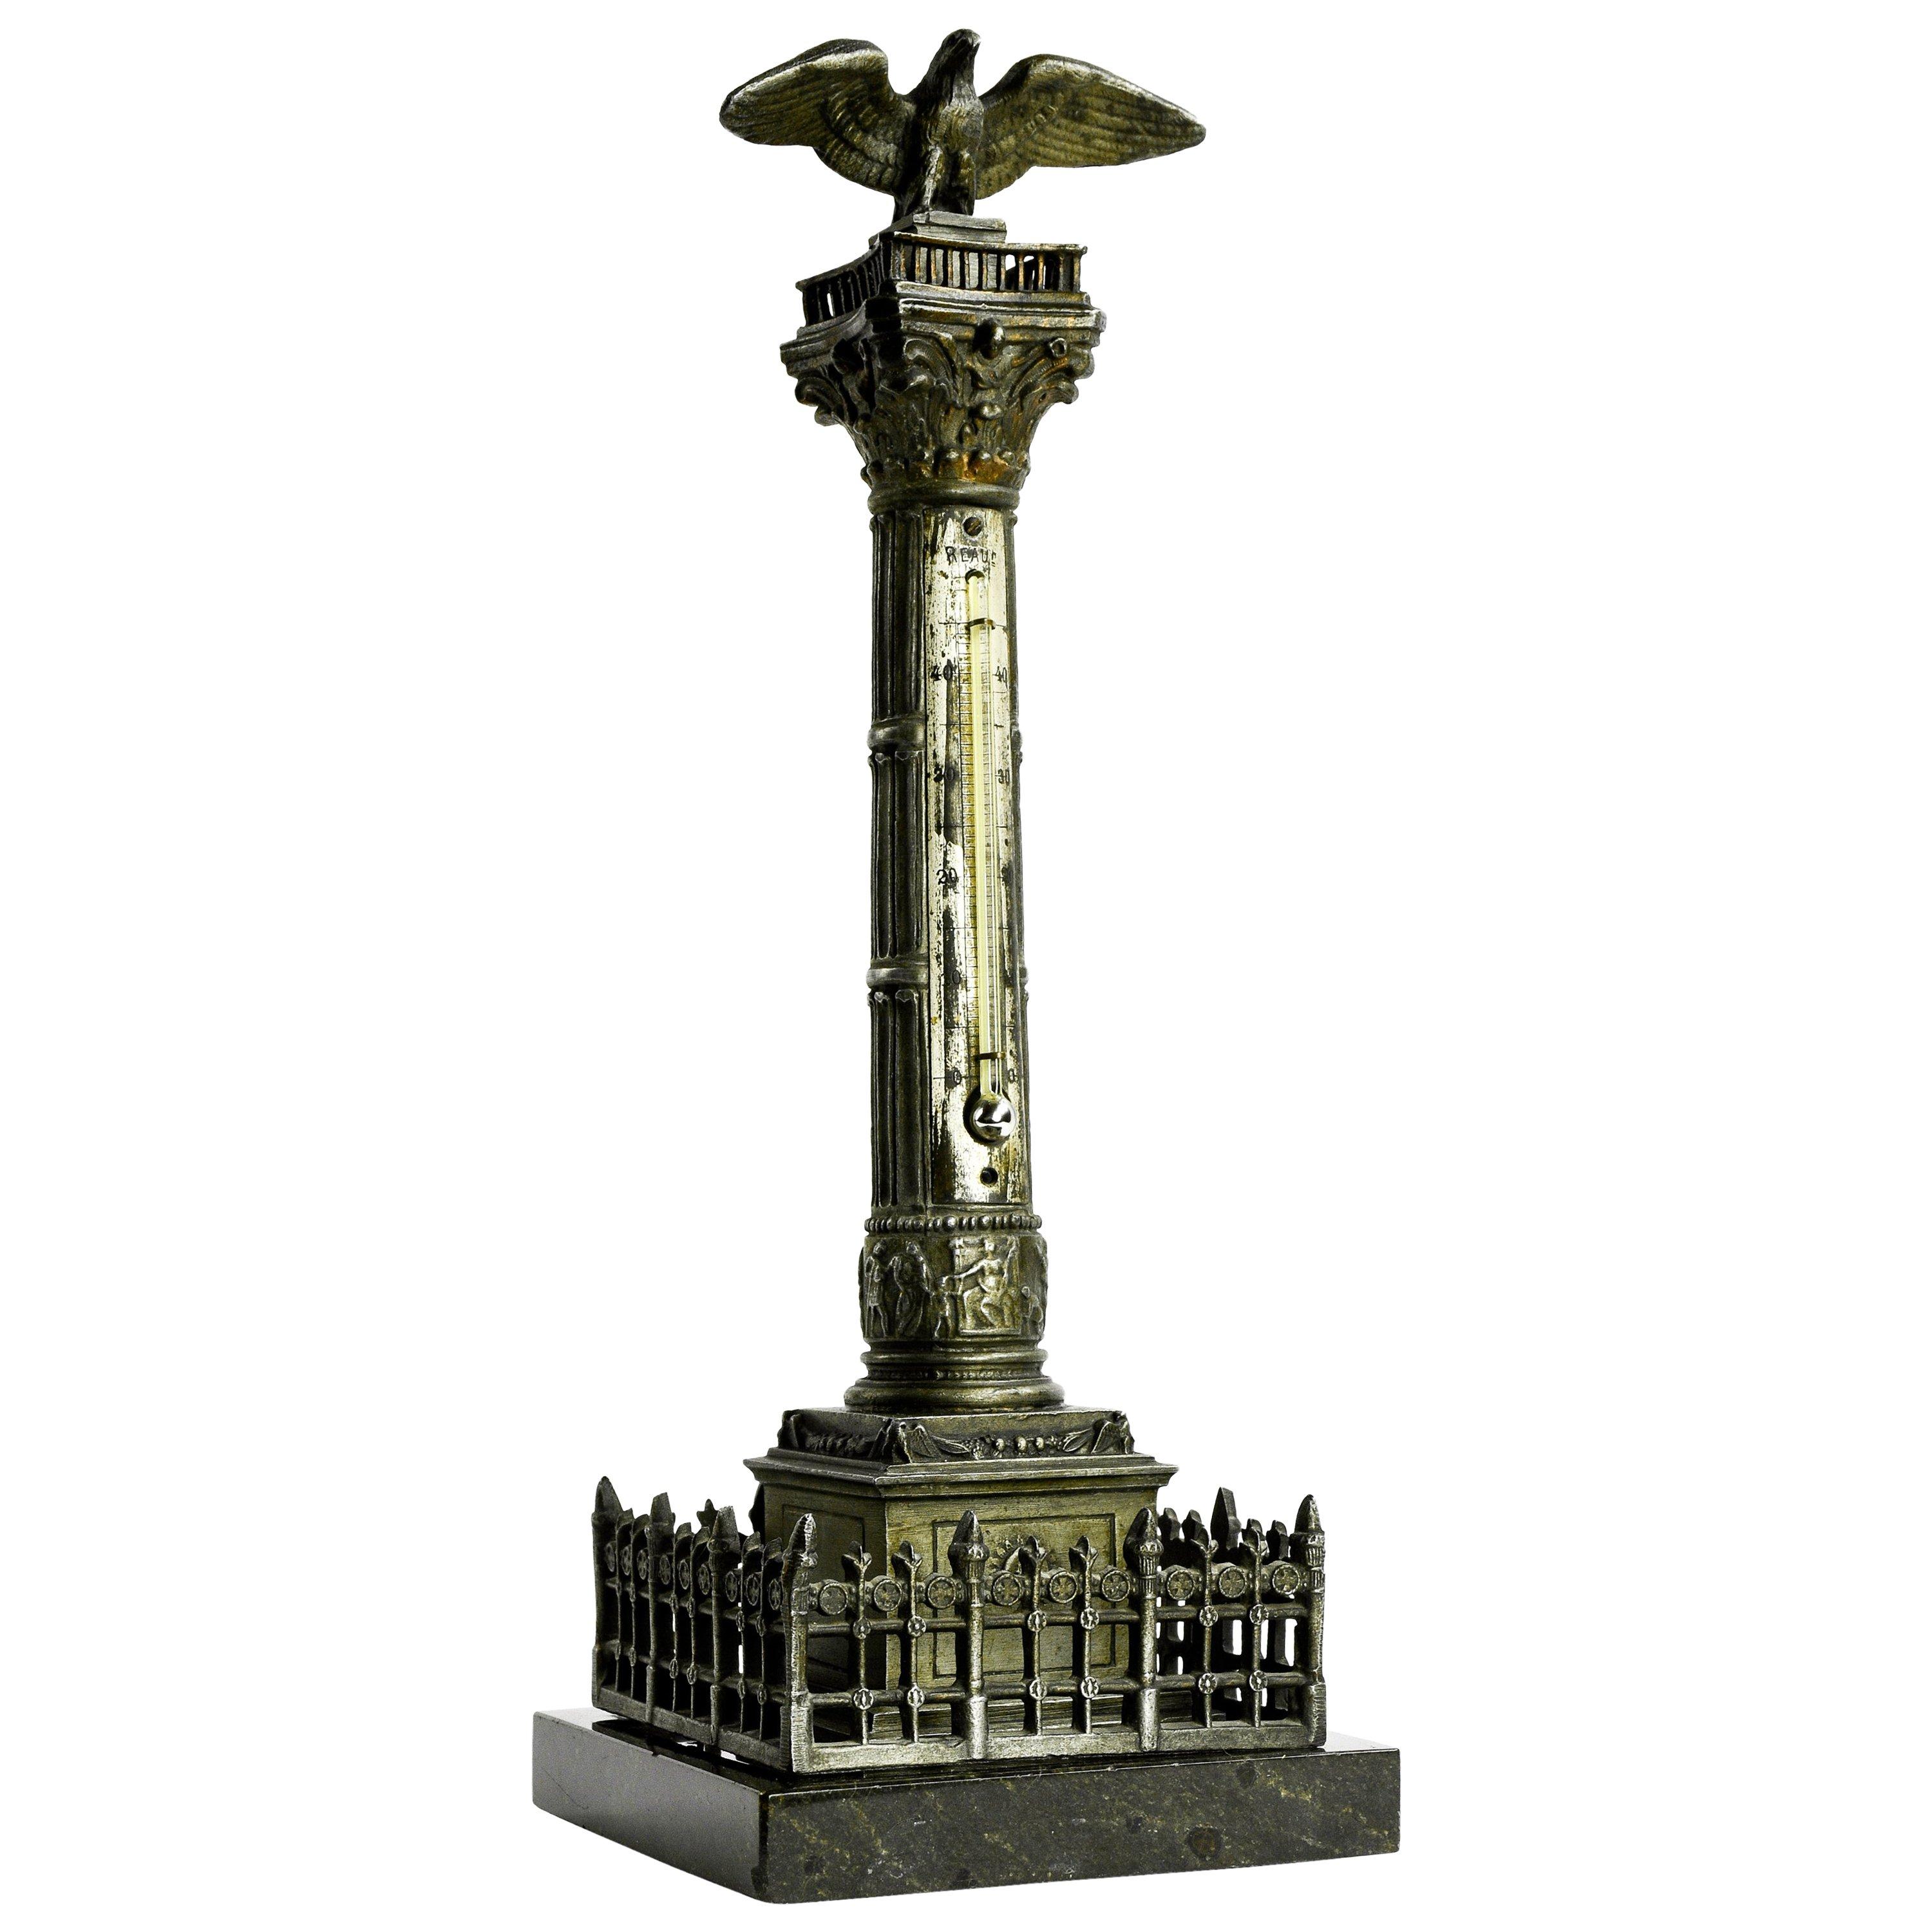 Scarce Invalidensaule Monument Model with Thermometer, circa 1854, Berlin For Sale